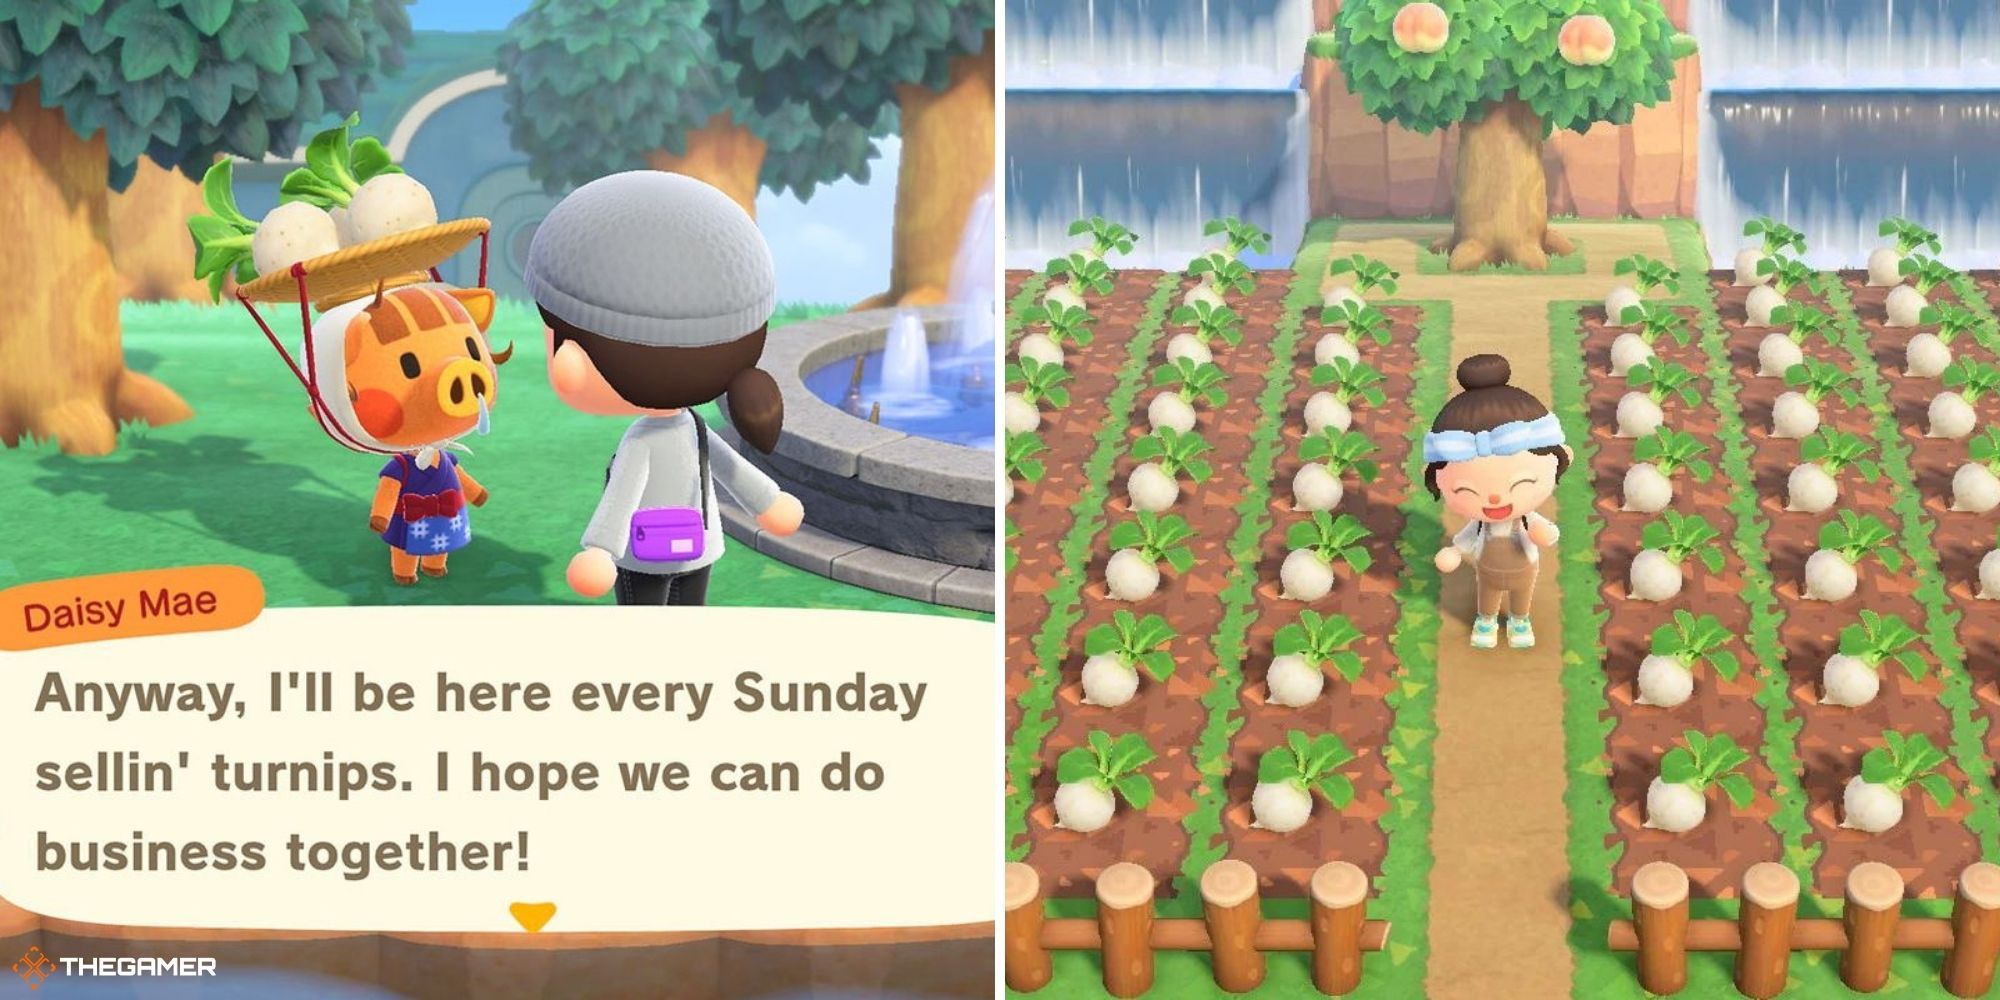 Your Guide To Turnips And The Stalk Market In Animal Crossing: New Horizons